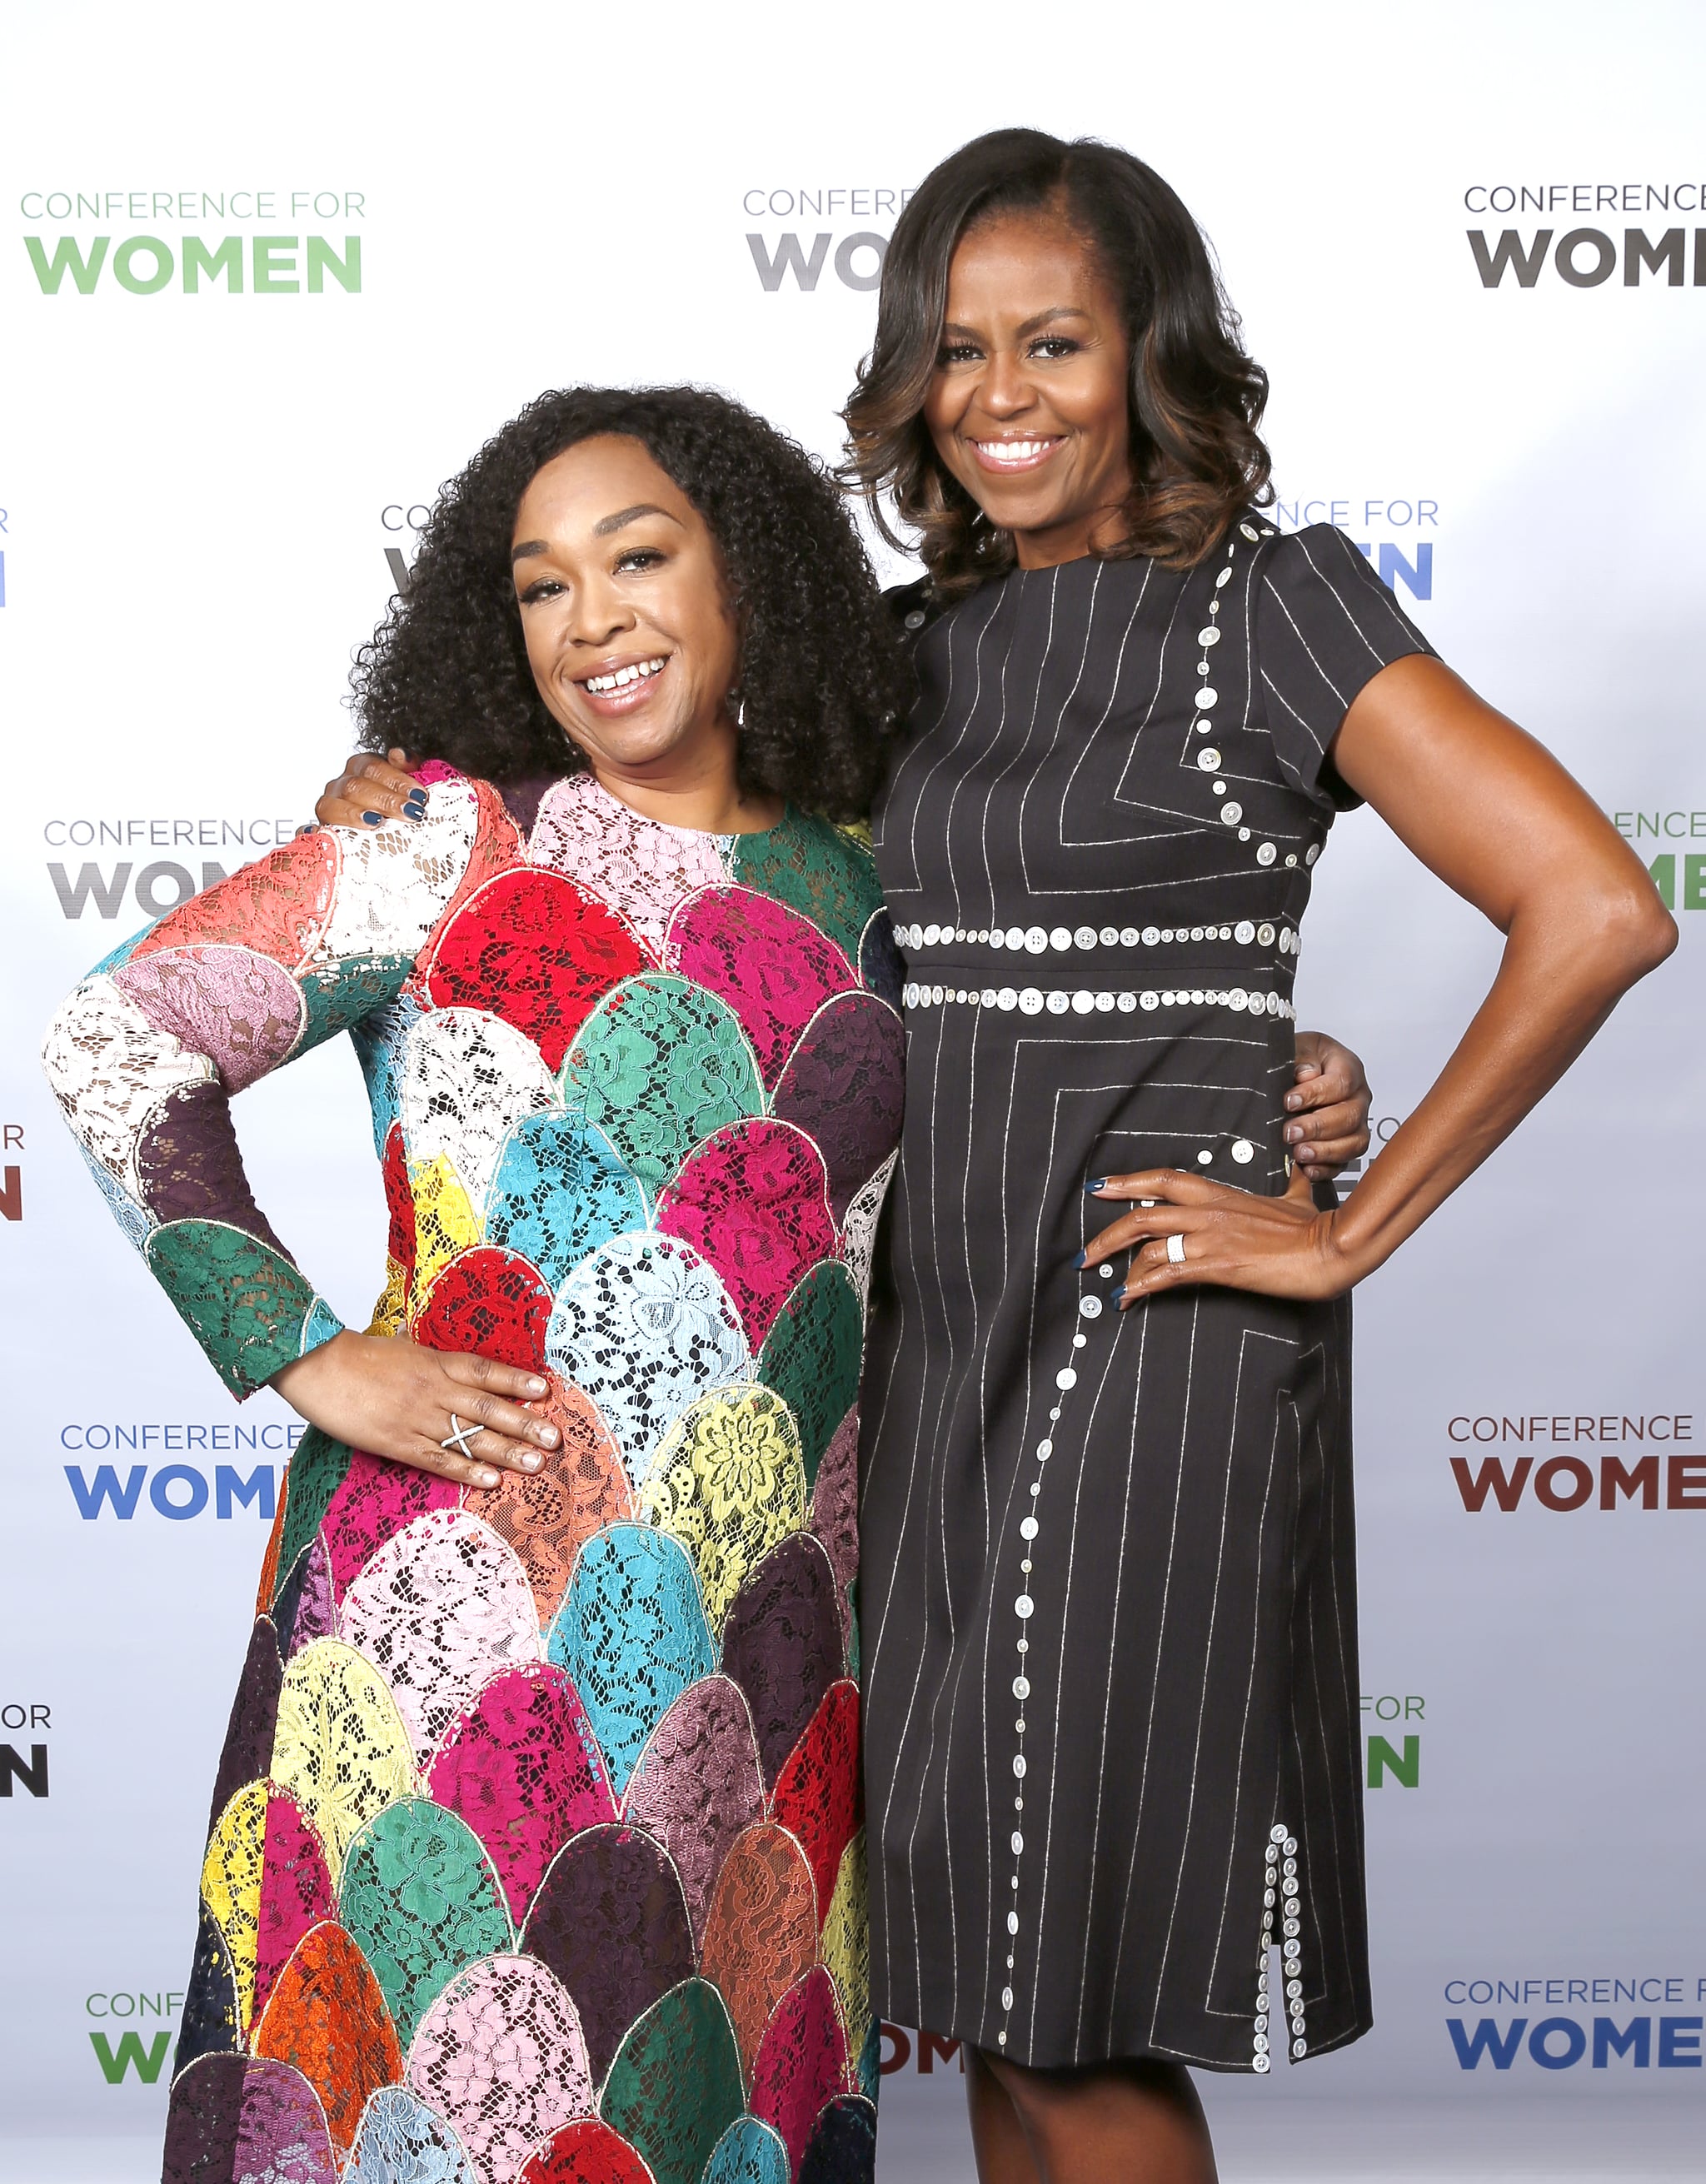 PHILADELPHIA, PA - OCTOBER 03:  Screenwriter, director and producer Shonda Rhimes and Former First Lady of the United States Michelle Obama pose for a photo together during Pennsylvania Conference For Women 2017 at Pennsylvania Convention Center on October 3, 2017 in Philadelphia, Pennsylvania.  (Photo by Marla Aufmuth/Getty Images for Pennsylvania Conference for Women)